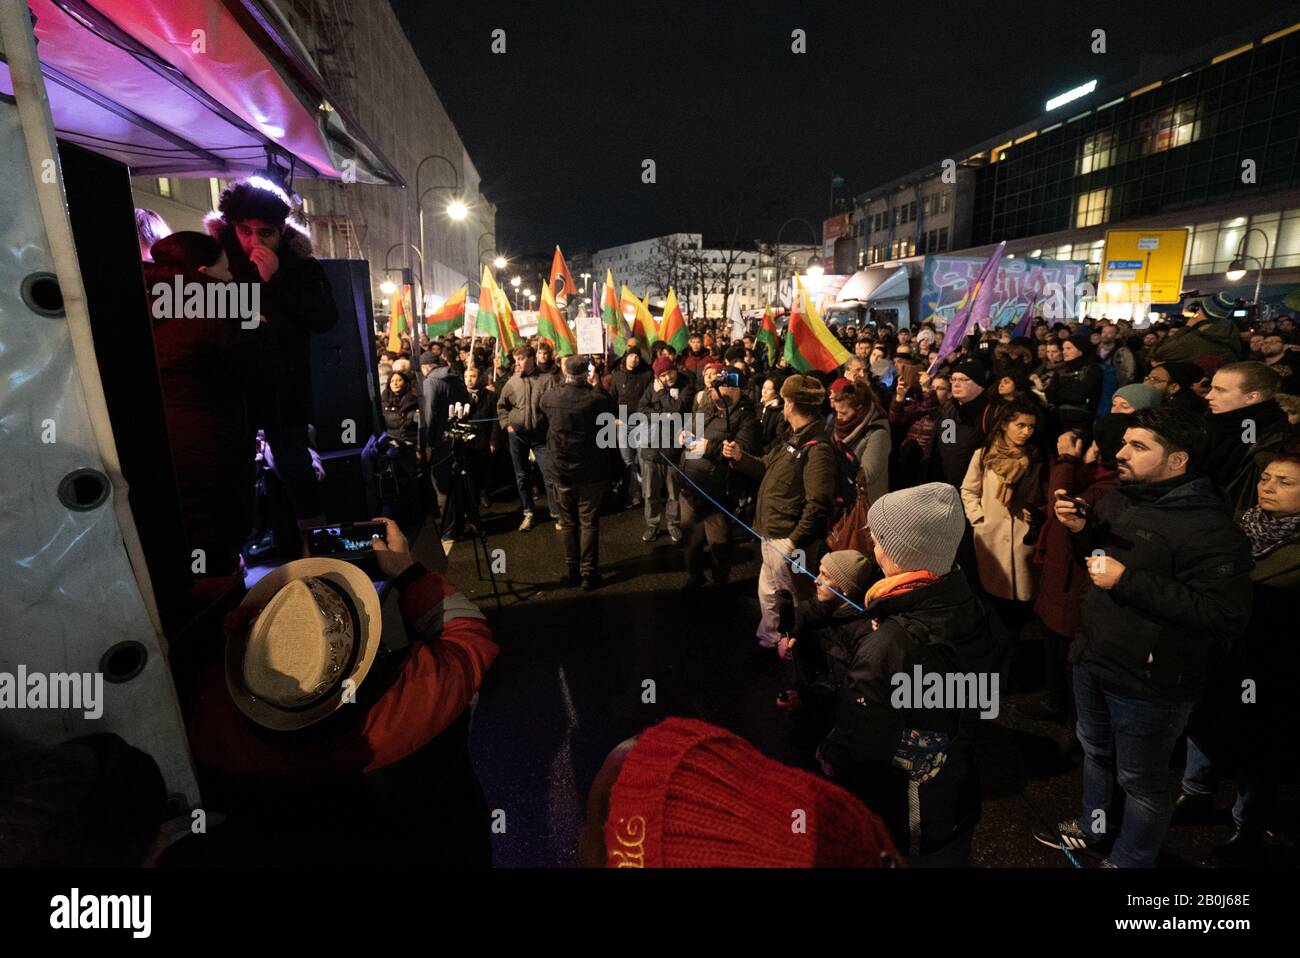 Berlin, Germany. 20th Feb 2020. A crowd listens to speeches at a protest vigil and march for the victims of the shooting attack at a shisha bar in Hanau, southwestern Germany, in which 9 people were killed. Around 3,000 attended the event at Hermannplatz, in the multicultural district of Neukölln, which took place under the slogan “Against right-wing terror and racism”. Credit: Tom Wills/Alamy Live News Stock Photo